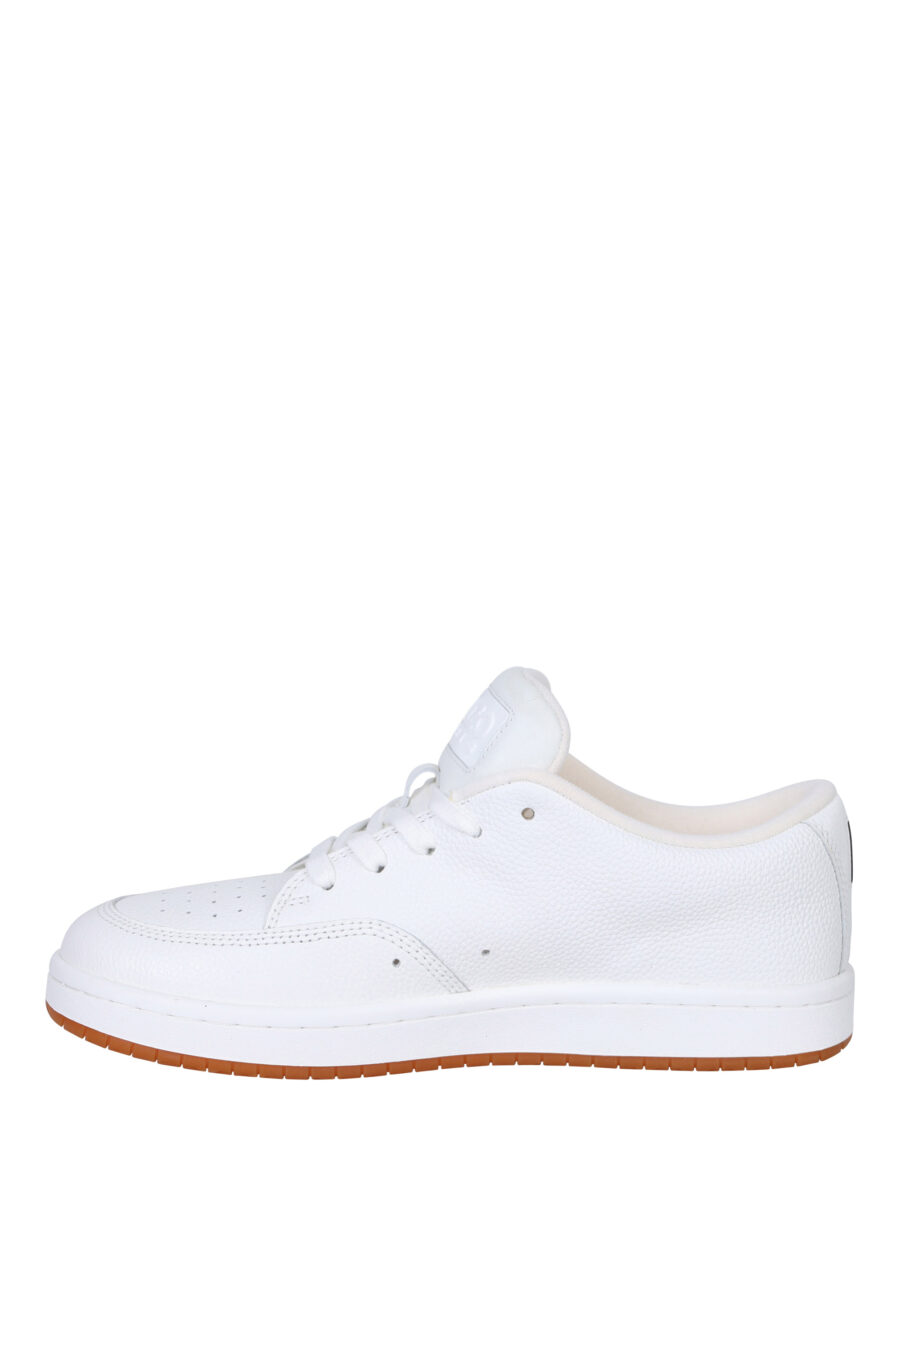 White trainers "kenzo dome" with minilogo and brown sole - 3612230556089 2